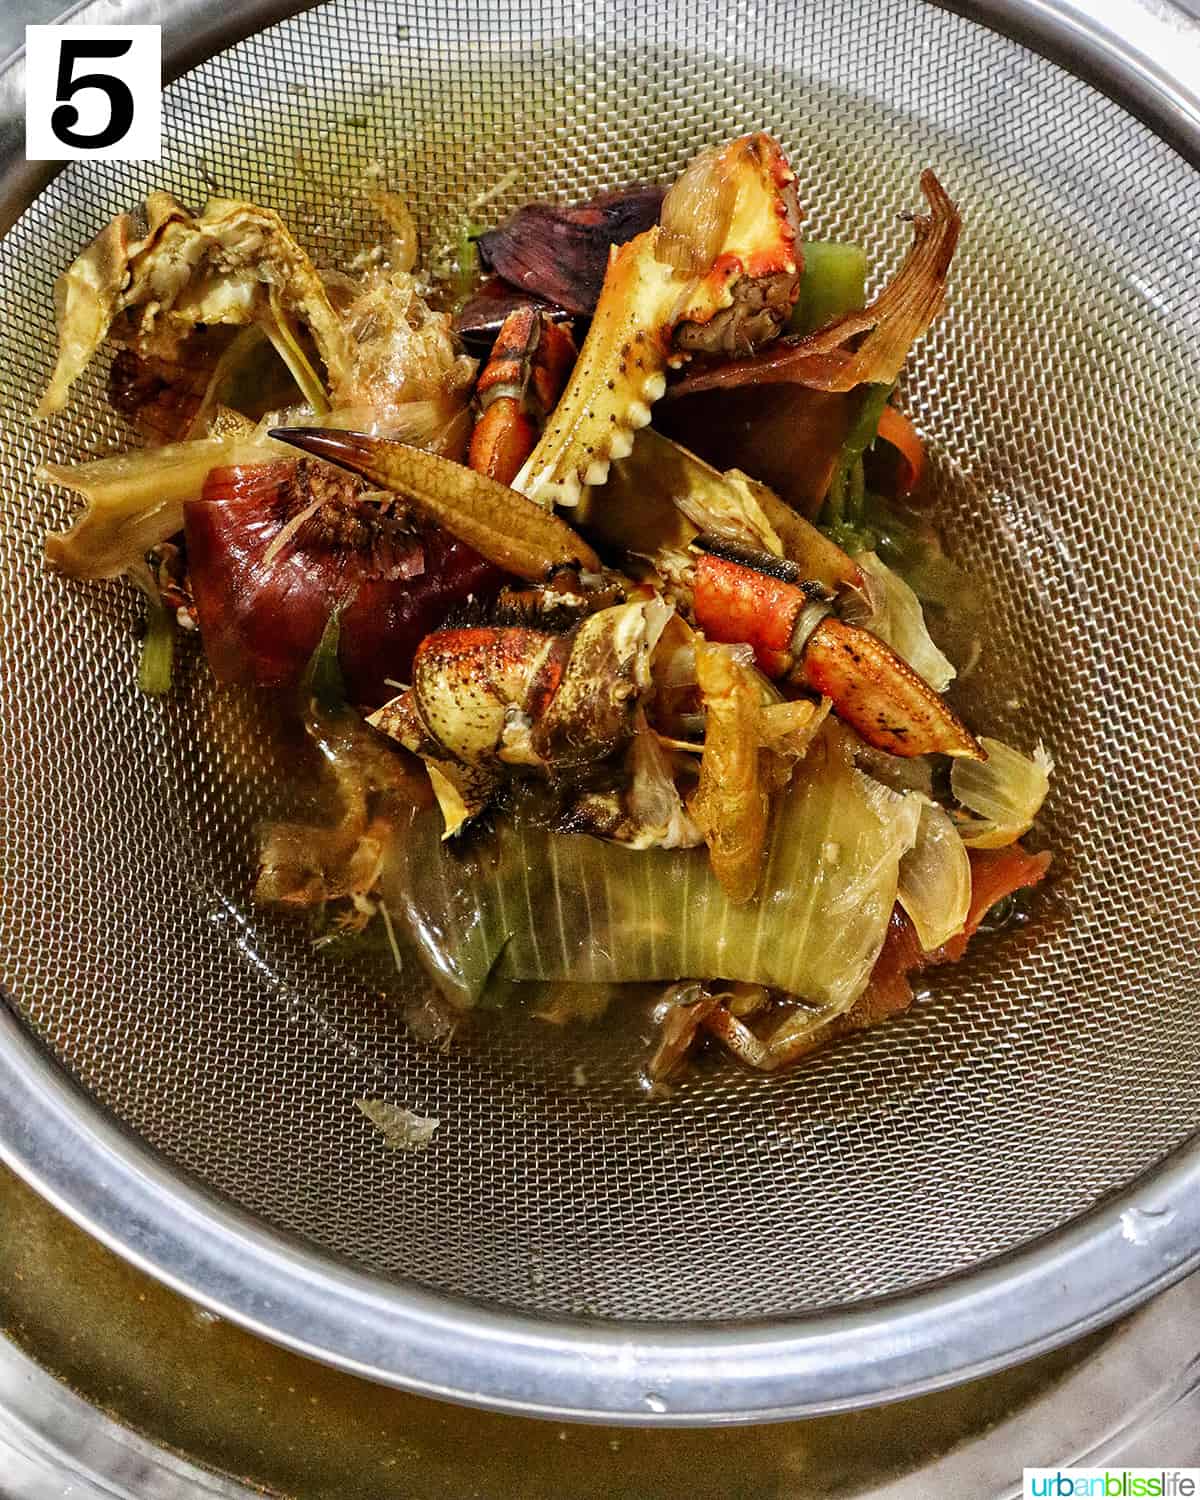 straining out the liquid and capturing the seafood and vegetable scraps in a sieve.